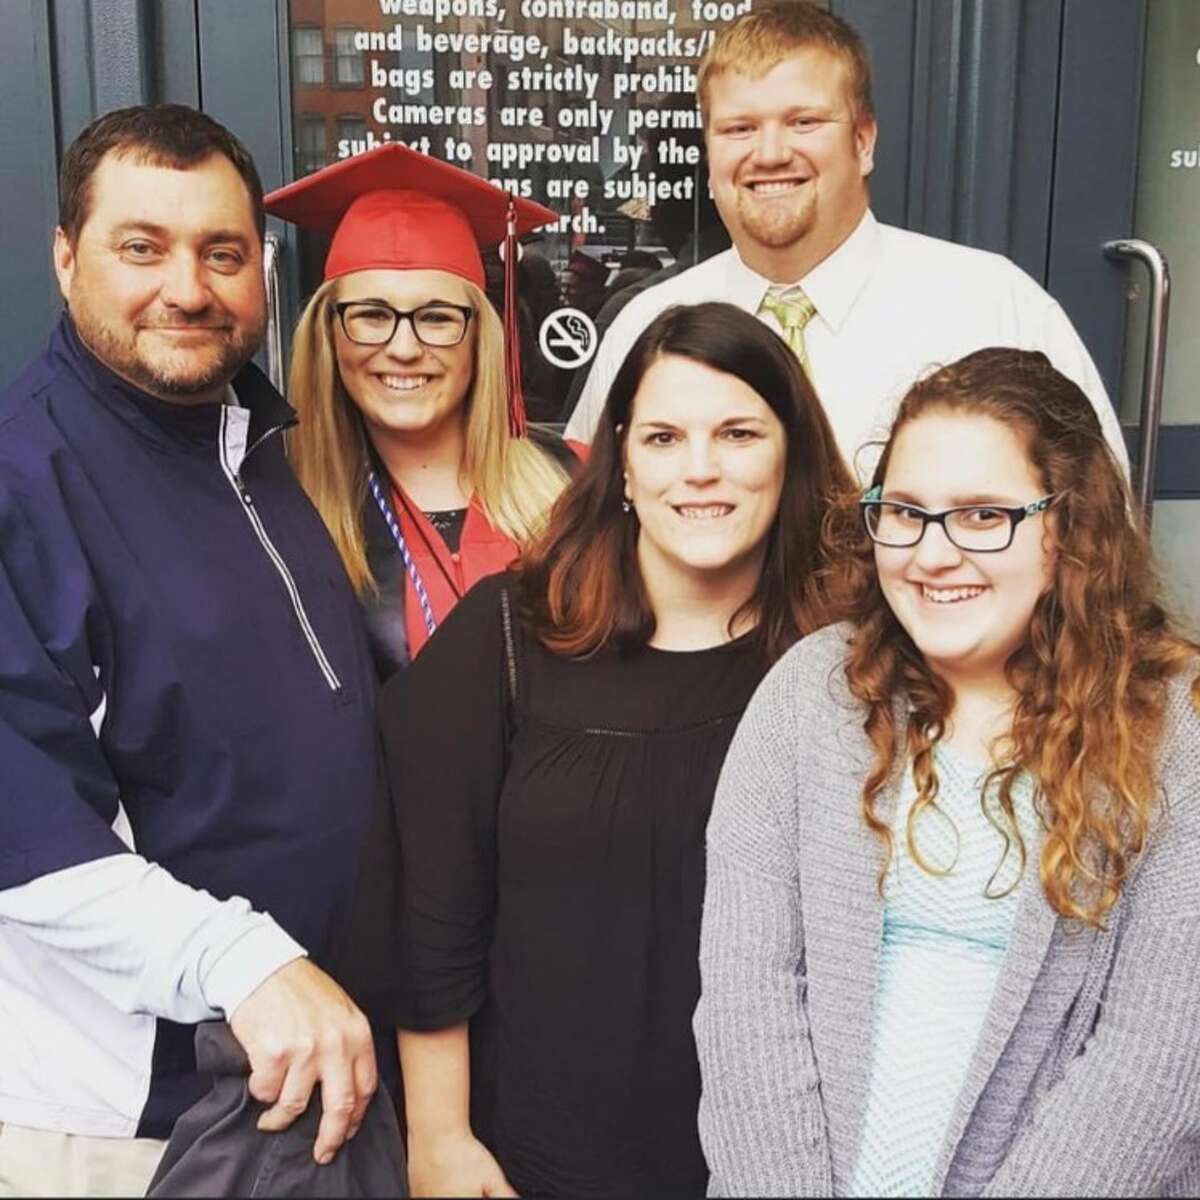 David Batzer II (Left), was born Feb. 26, 1963, and passed away on Jan. 4, 2023. He is pictured with his family (from left to right), his daughter Tori Durr, his wife Katie Batzer, His son-in-law Kelly Durr, and his daughter Clare Batzer.